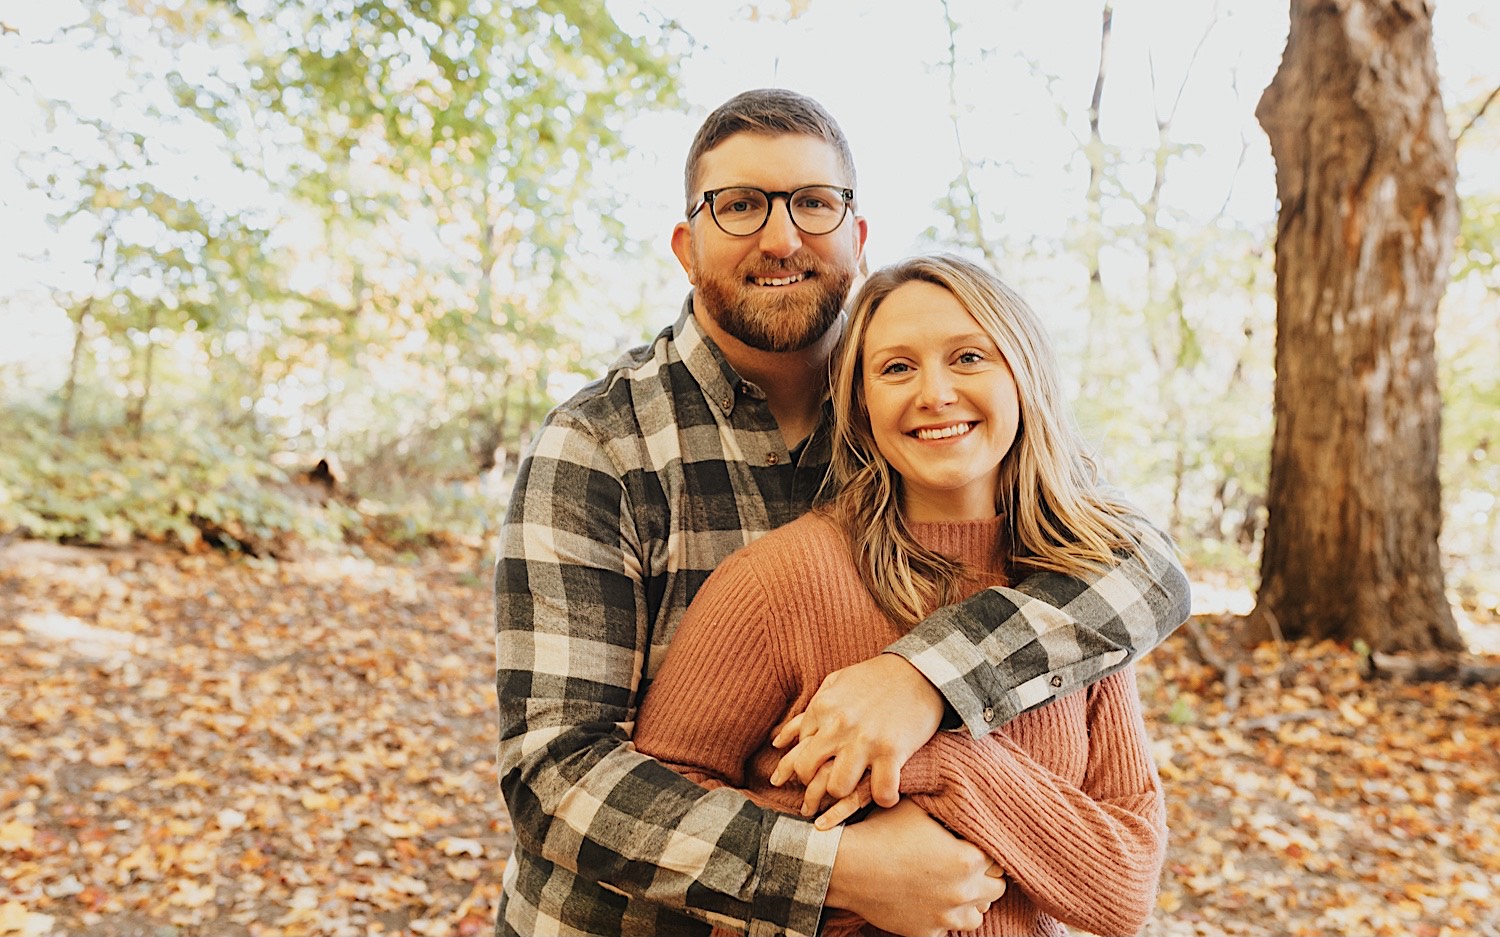 Portrait photo of a man and woman where the man is hugging her from behind and they are both smiling at the camera with leaves on the ground around them